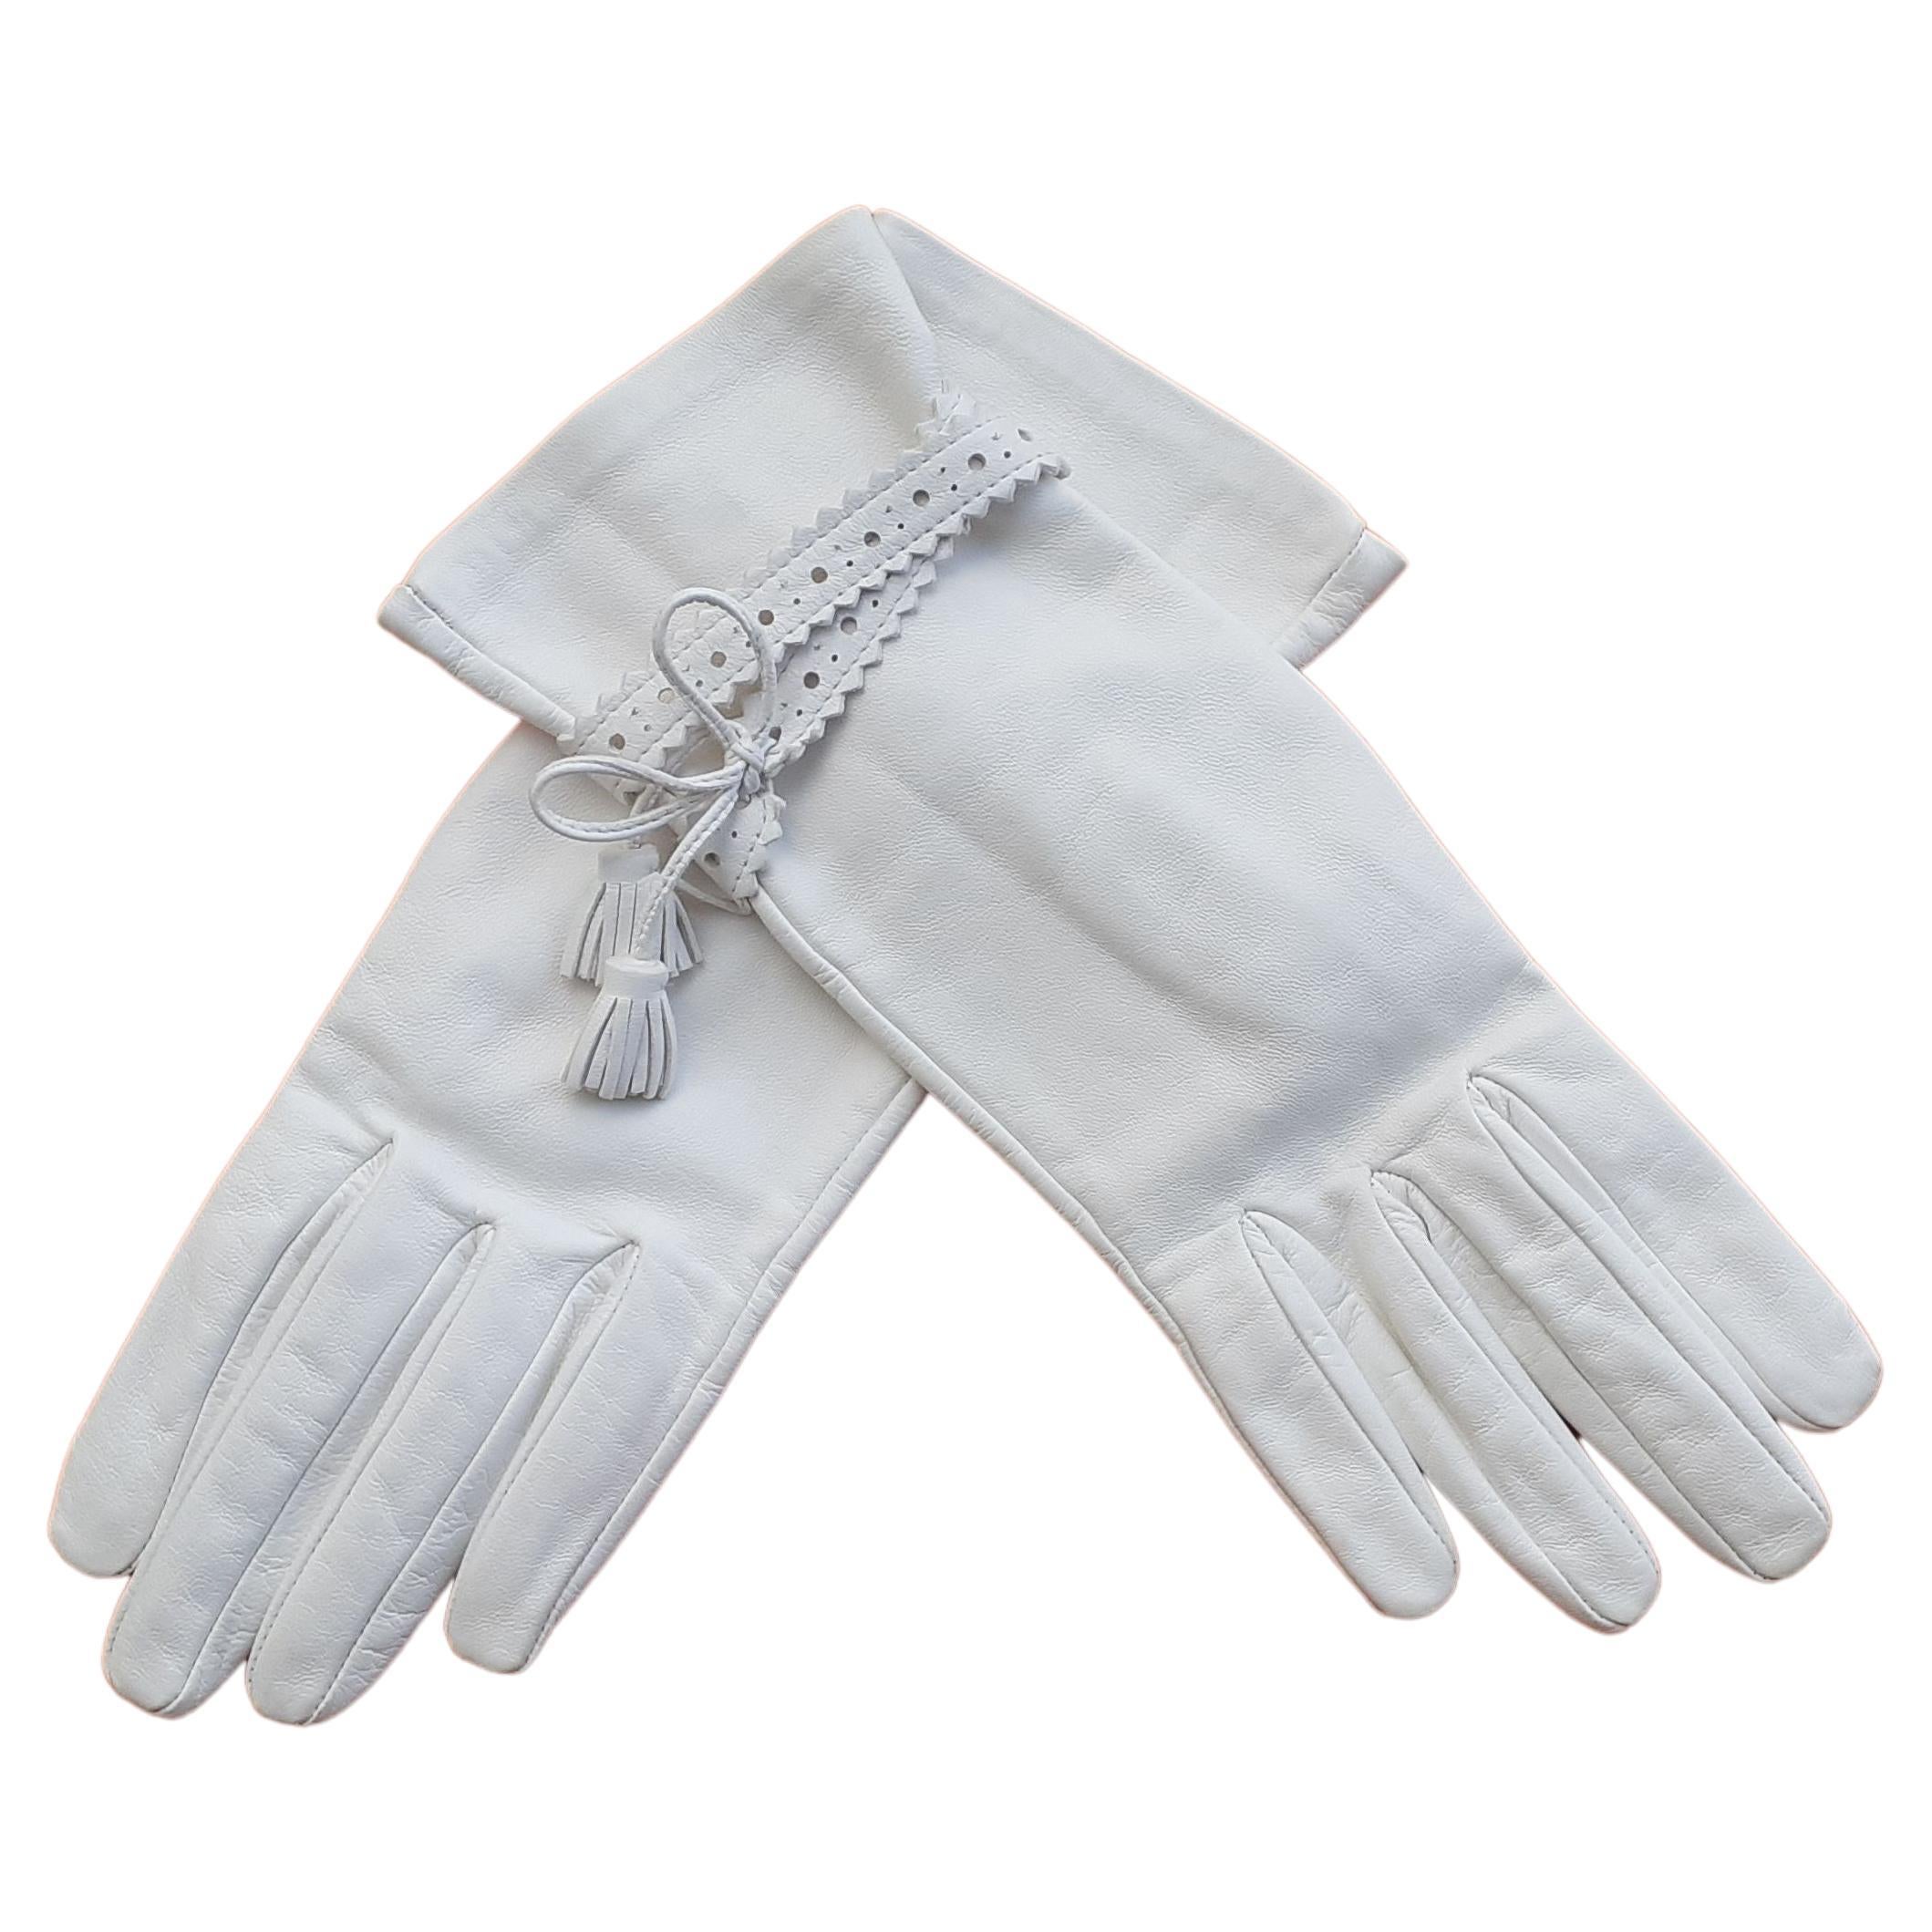 Lovely Hermès White Leather and Silk Gloves Ghillies Size 6.5